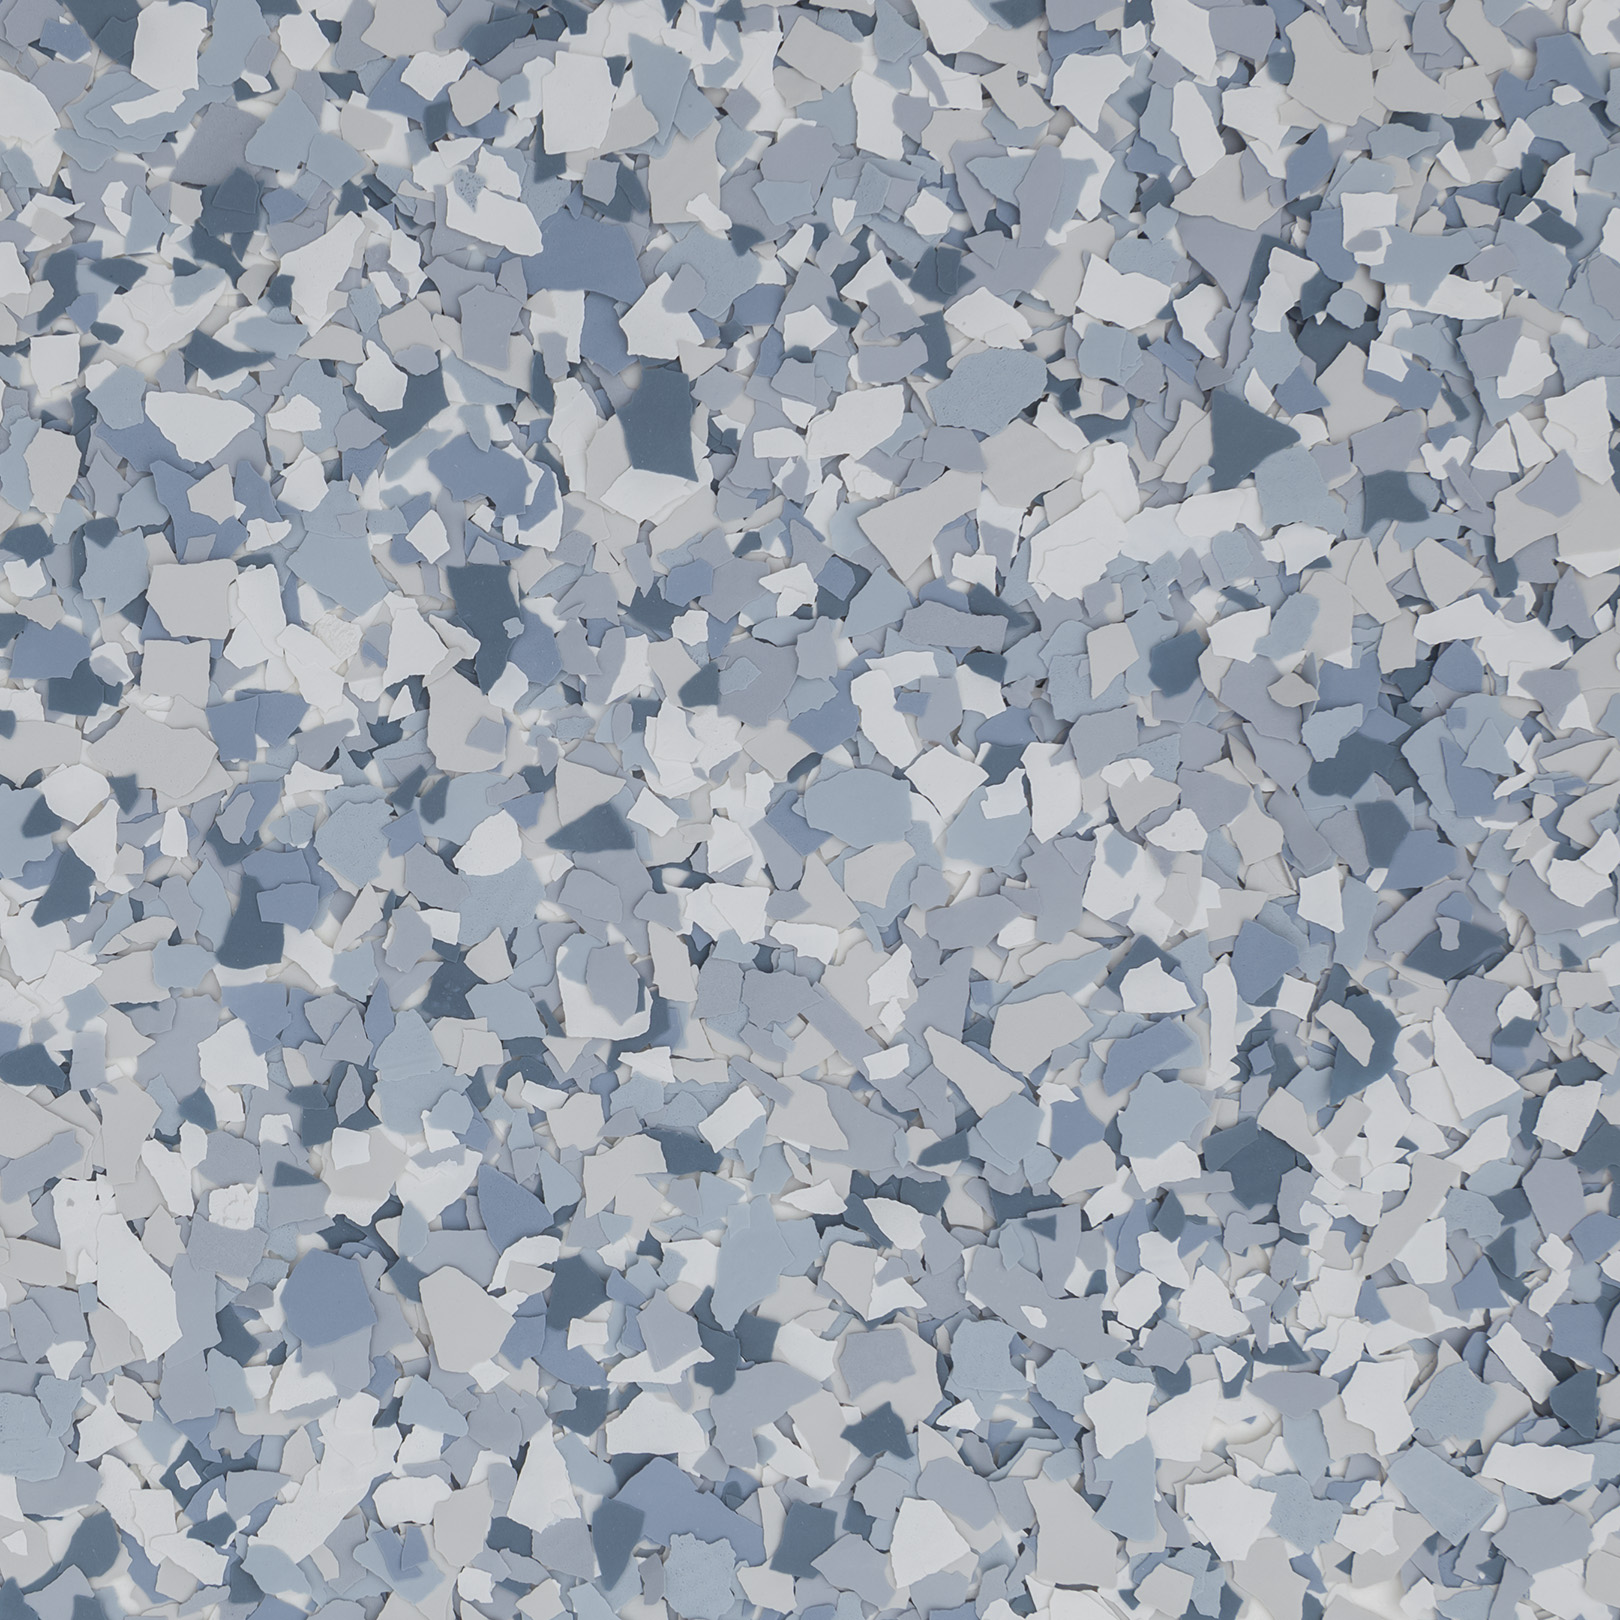 What Are Epoxy Color Chips?